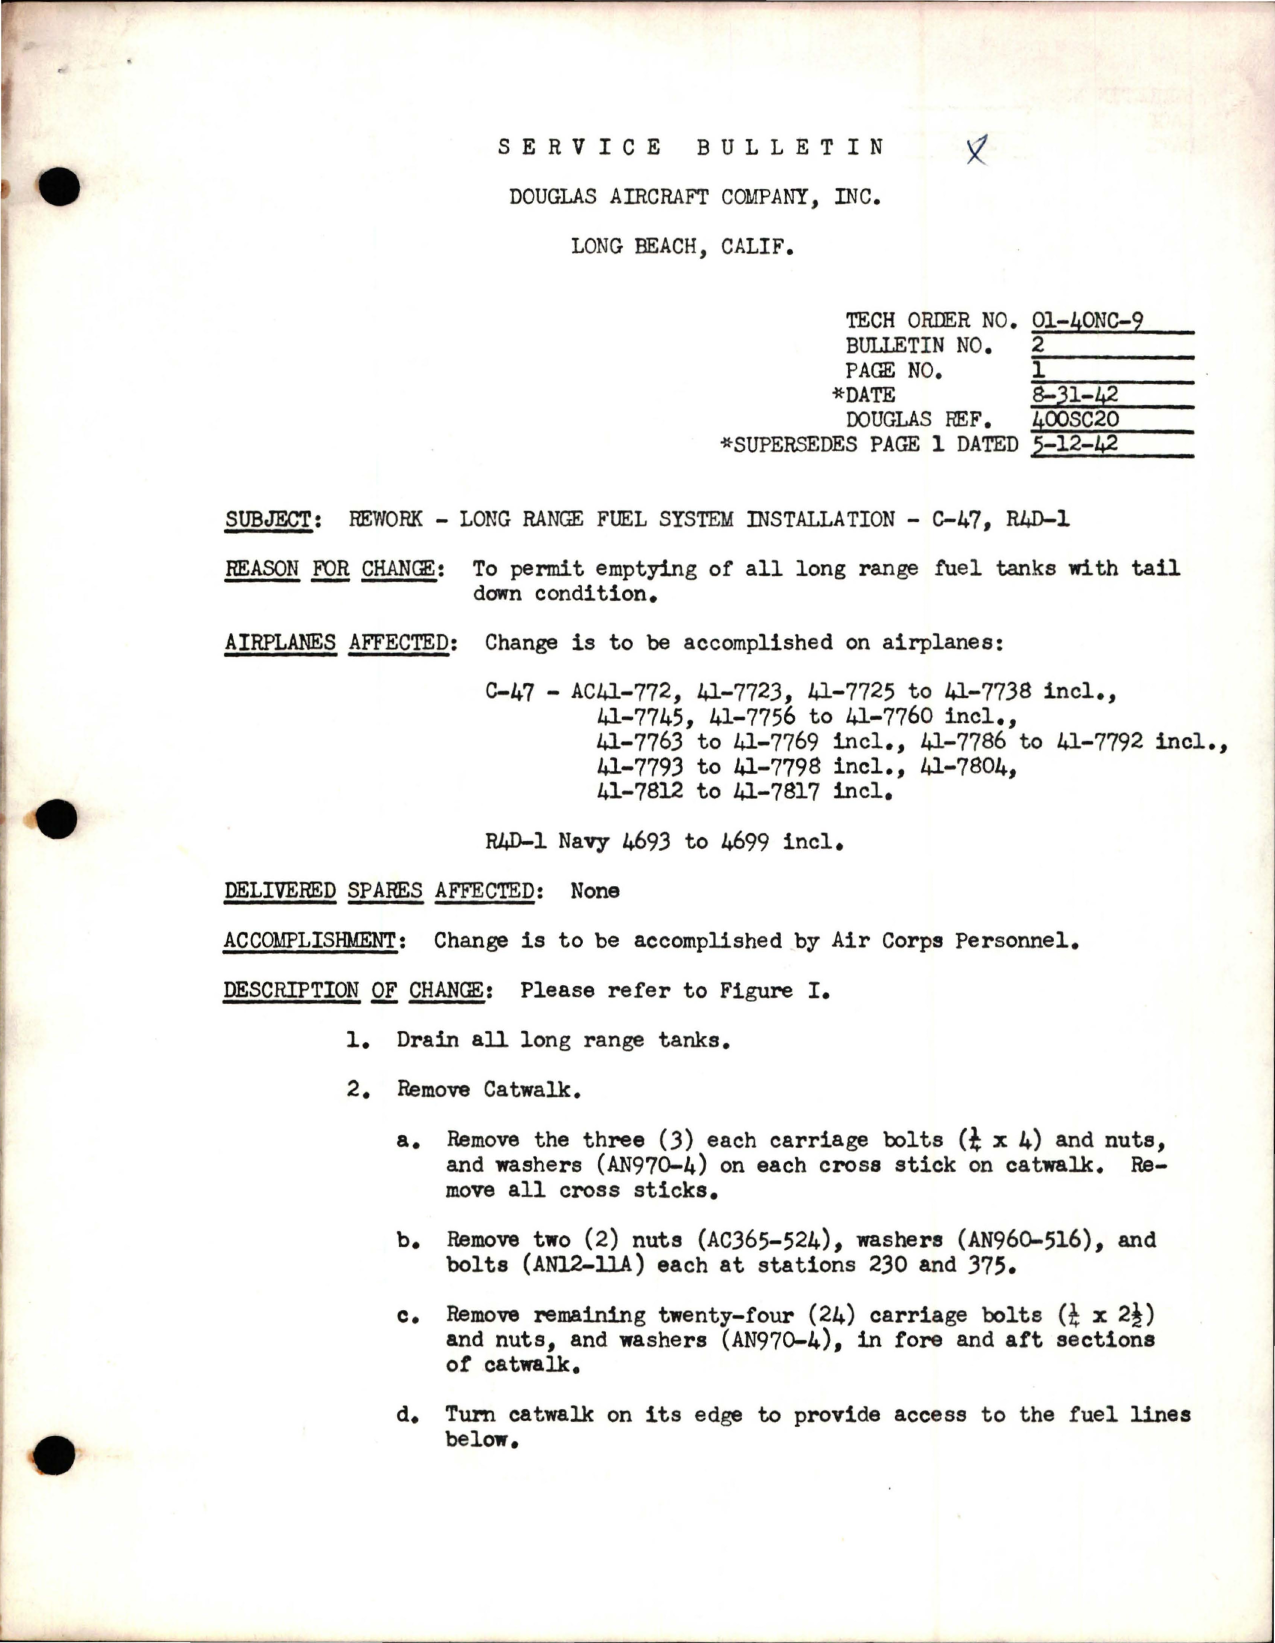 Sample page 1 from AirCorps Library document: Rework of Long Range Fuel System Installation